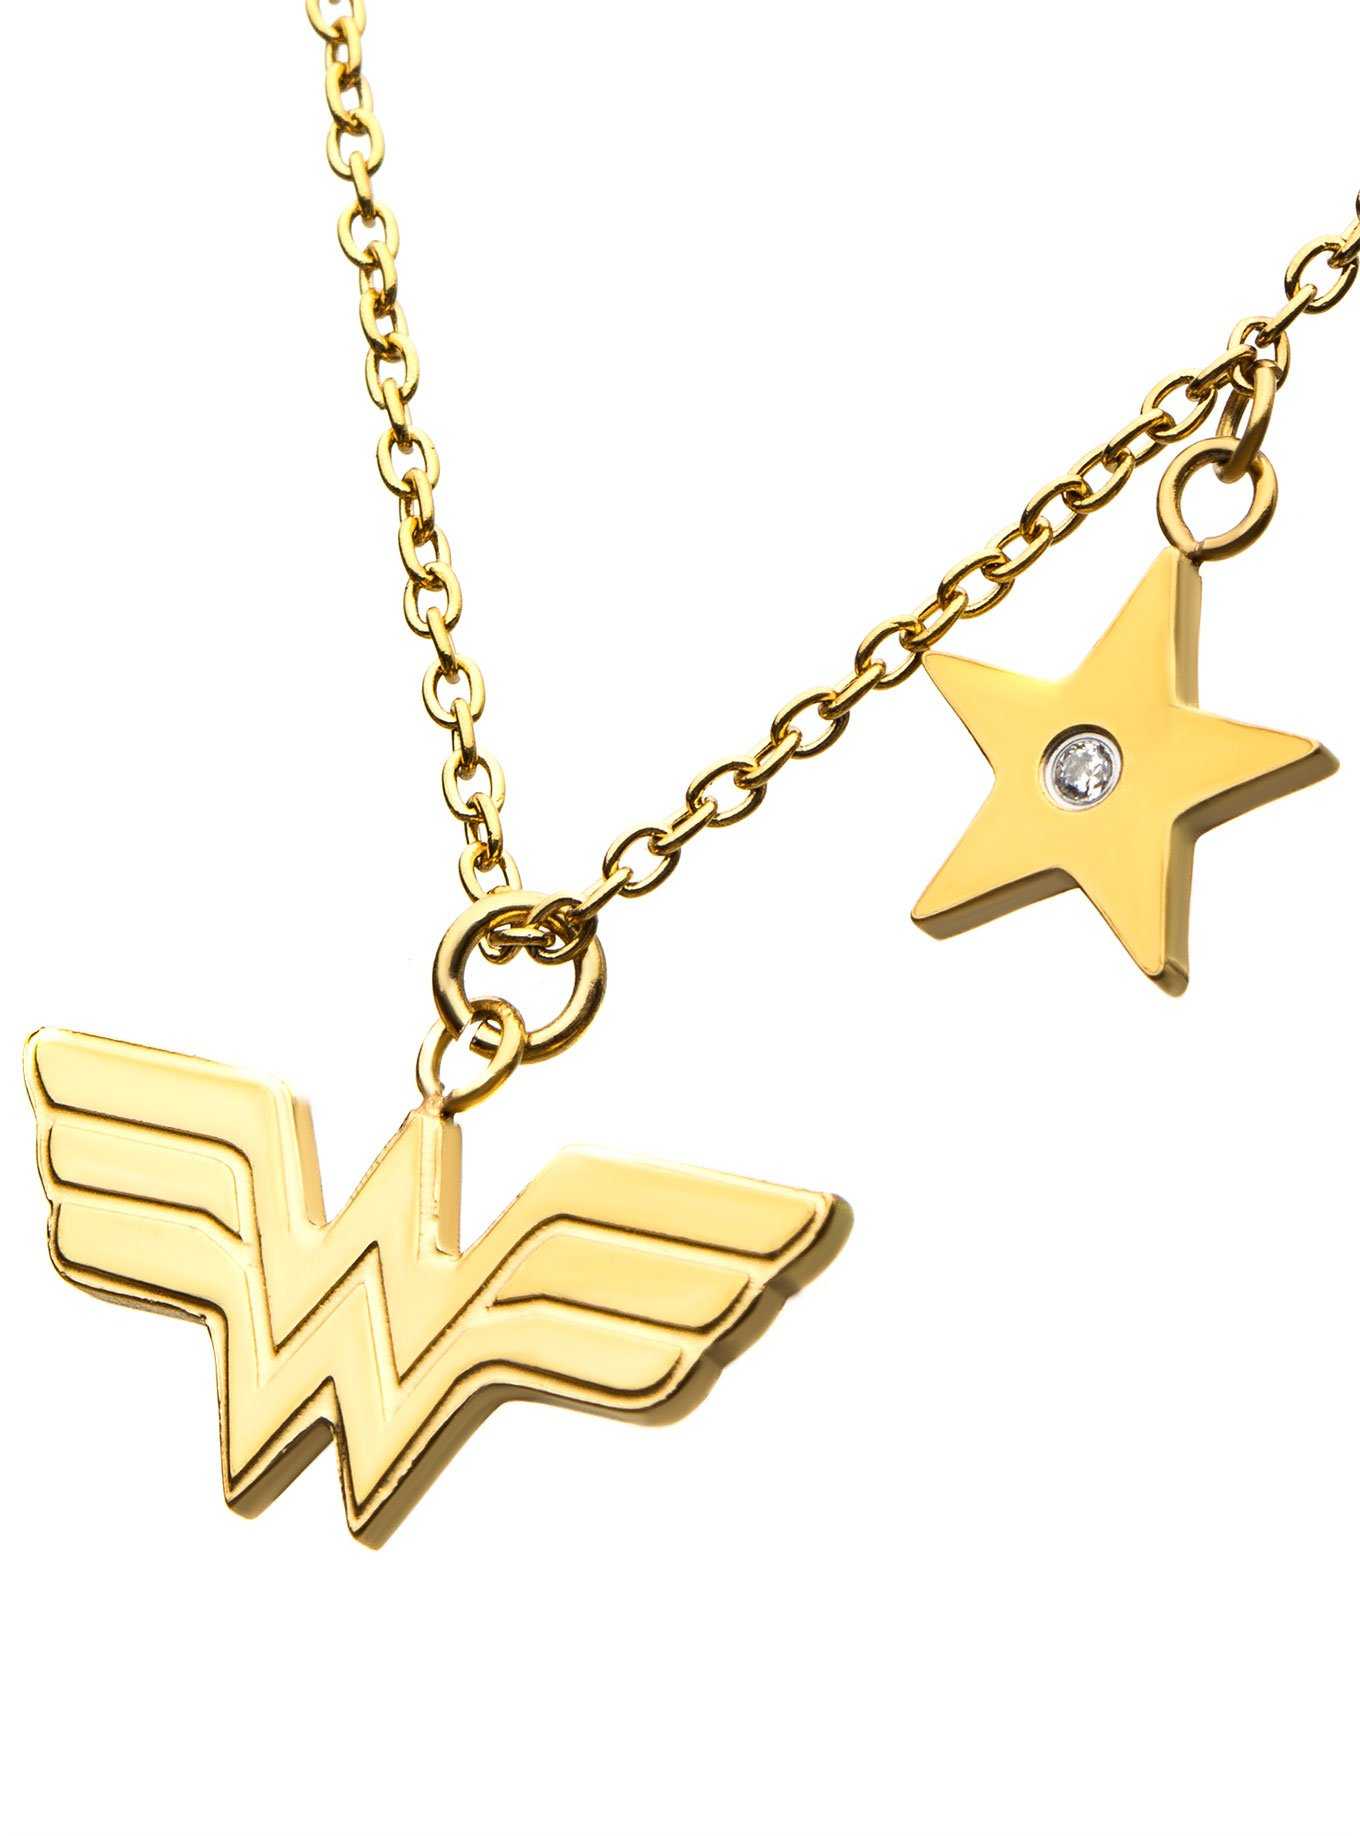 DC Comics Wonder Woman Stainless Steel Gold Plated Necklace, , hi-res